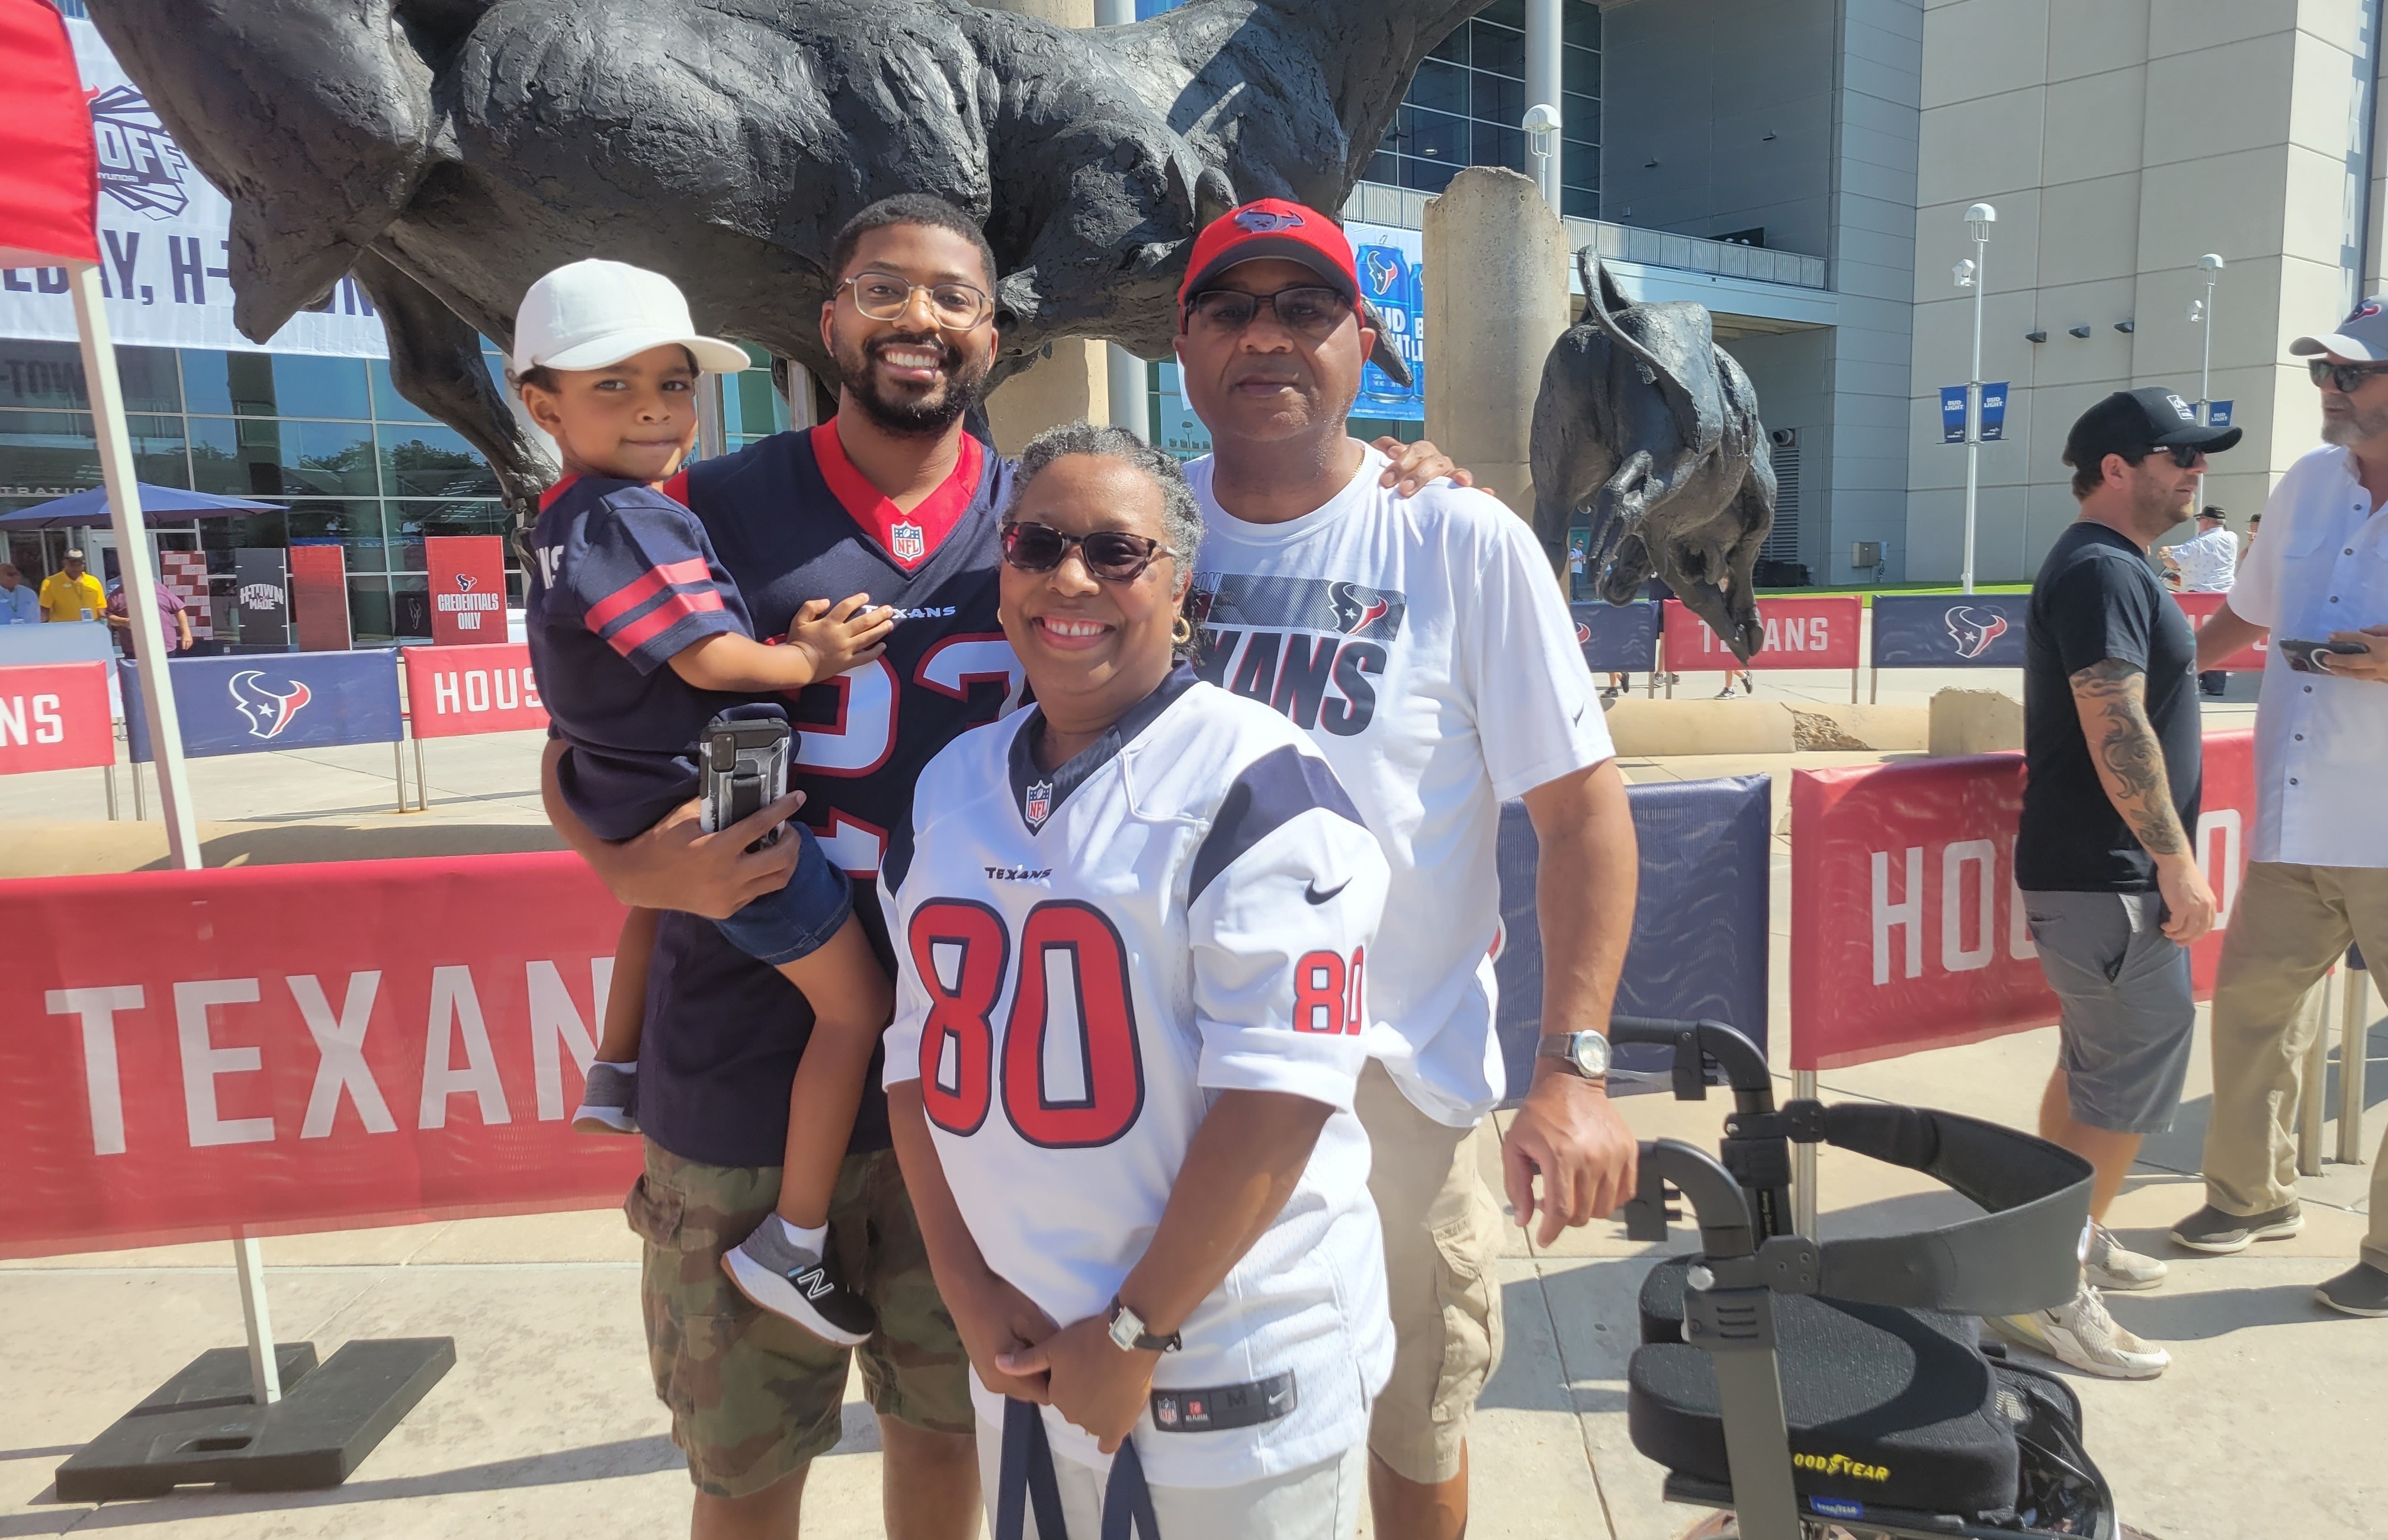 Event Feedback: Houston Texans - NFL vs Indianapolis Colts